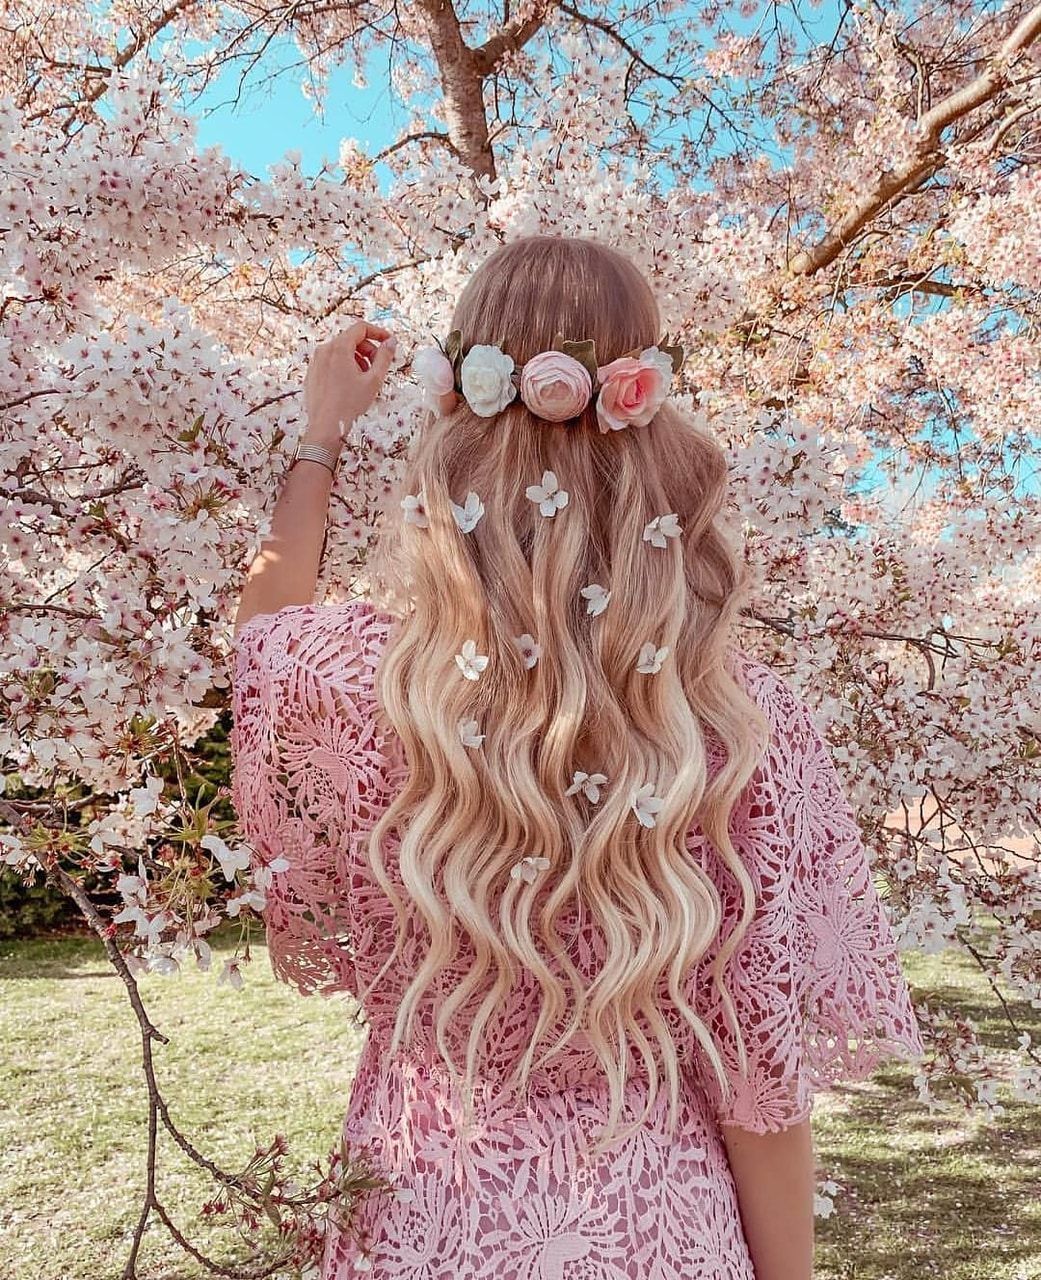 The Prettiest Spring LookBook That Will Make You Want Spring ASAP. Flower photohoot, Cute girl wallpaper, Girly picture